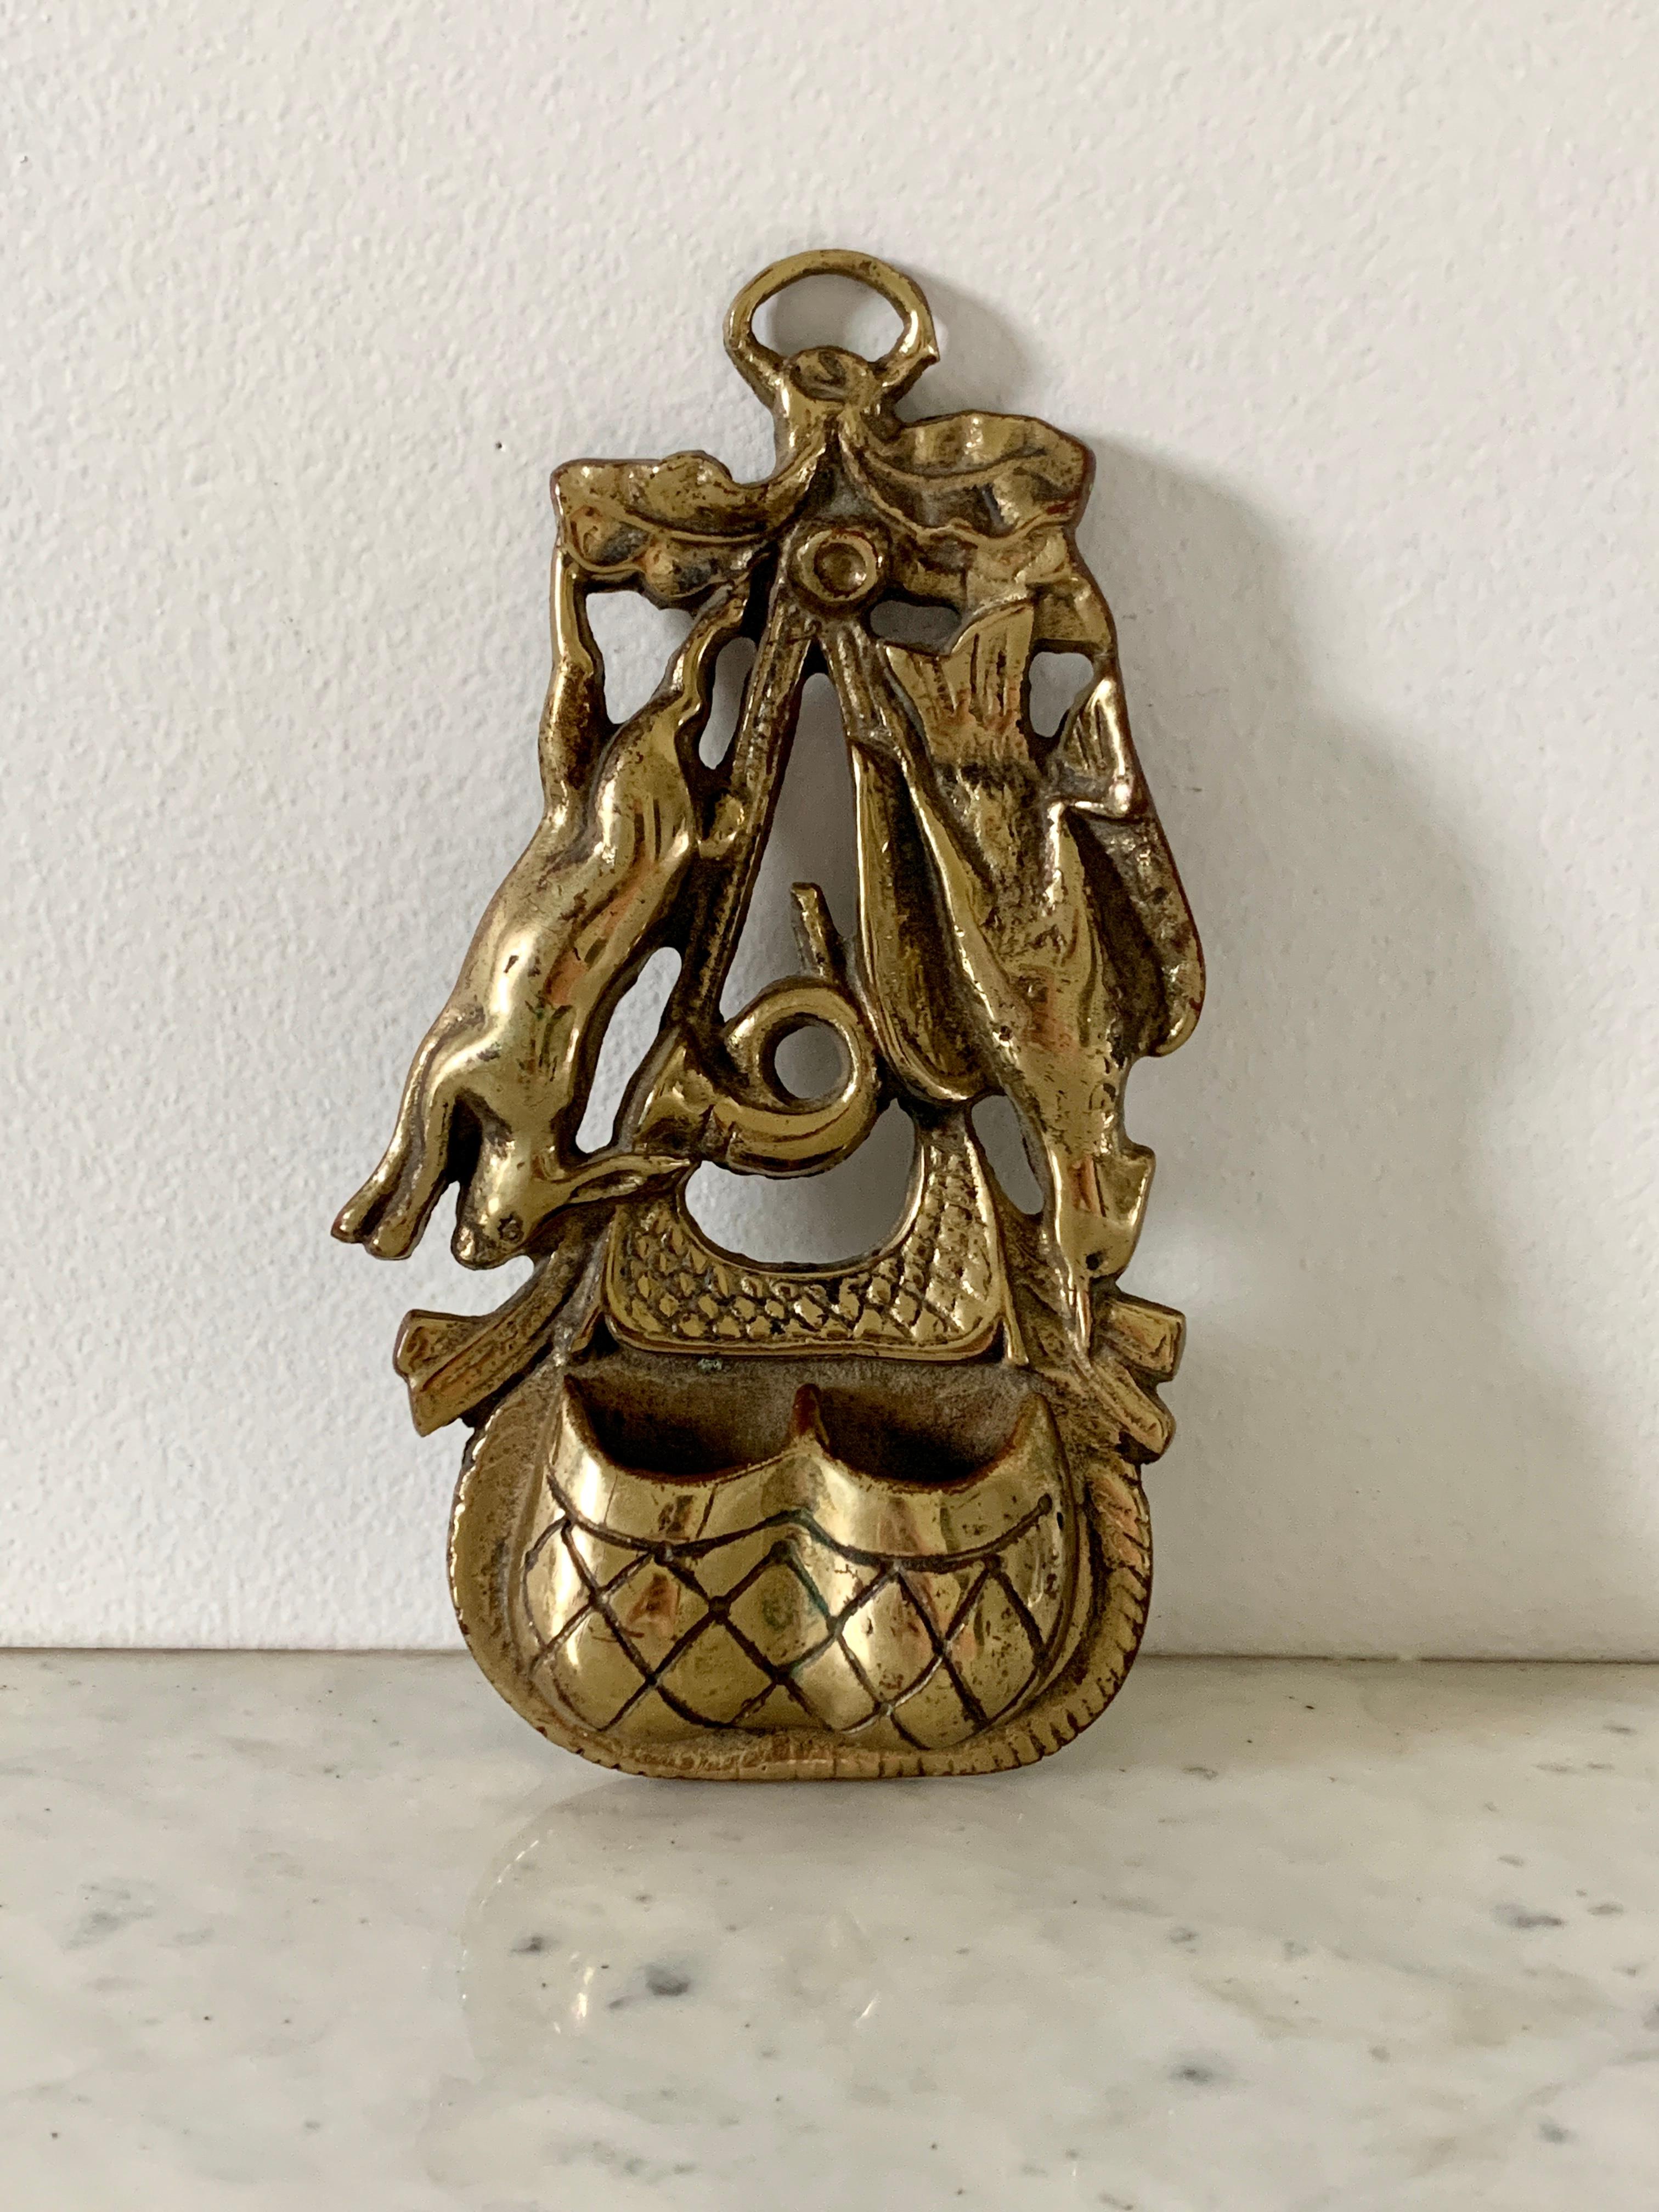 Cast Solid Brass Hunt Themed Match Holder In Good Condition For Sale In Elkhart, IN